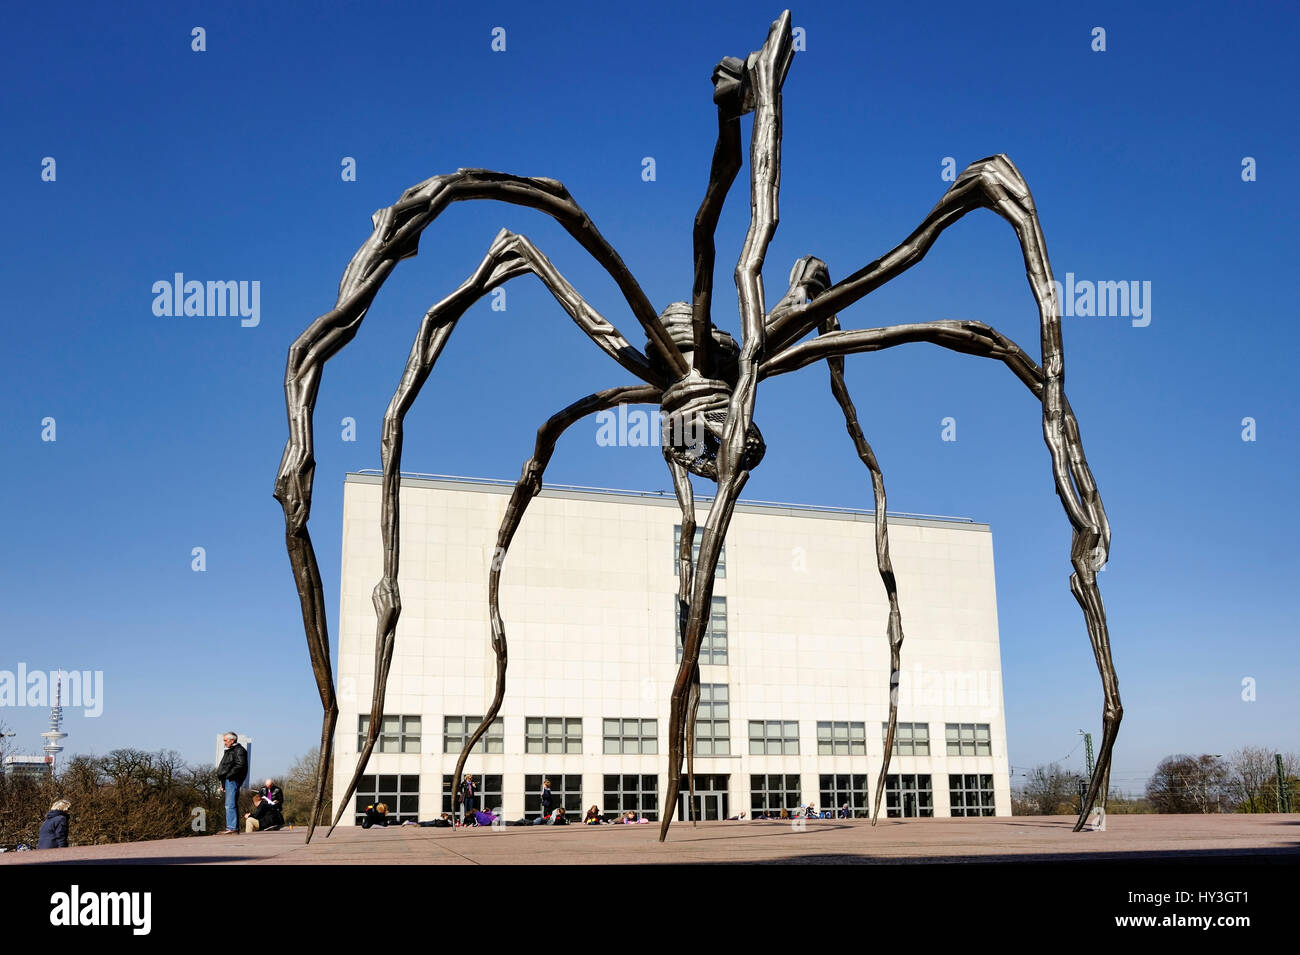 New arts centre with the sculpture Maman of Louise Bourgeois in Hamburg, Germany, Europe, Neue Kunsthalle mit der Skulptur Maman von Louise Bourgeois  Stock Photo